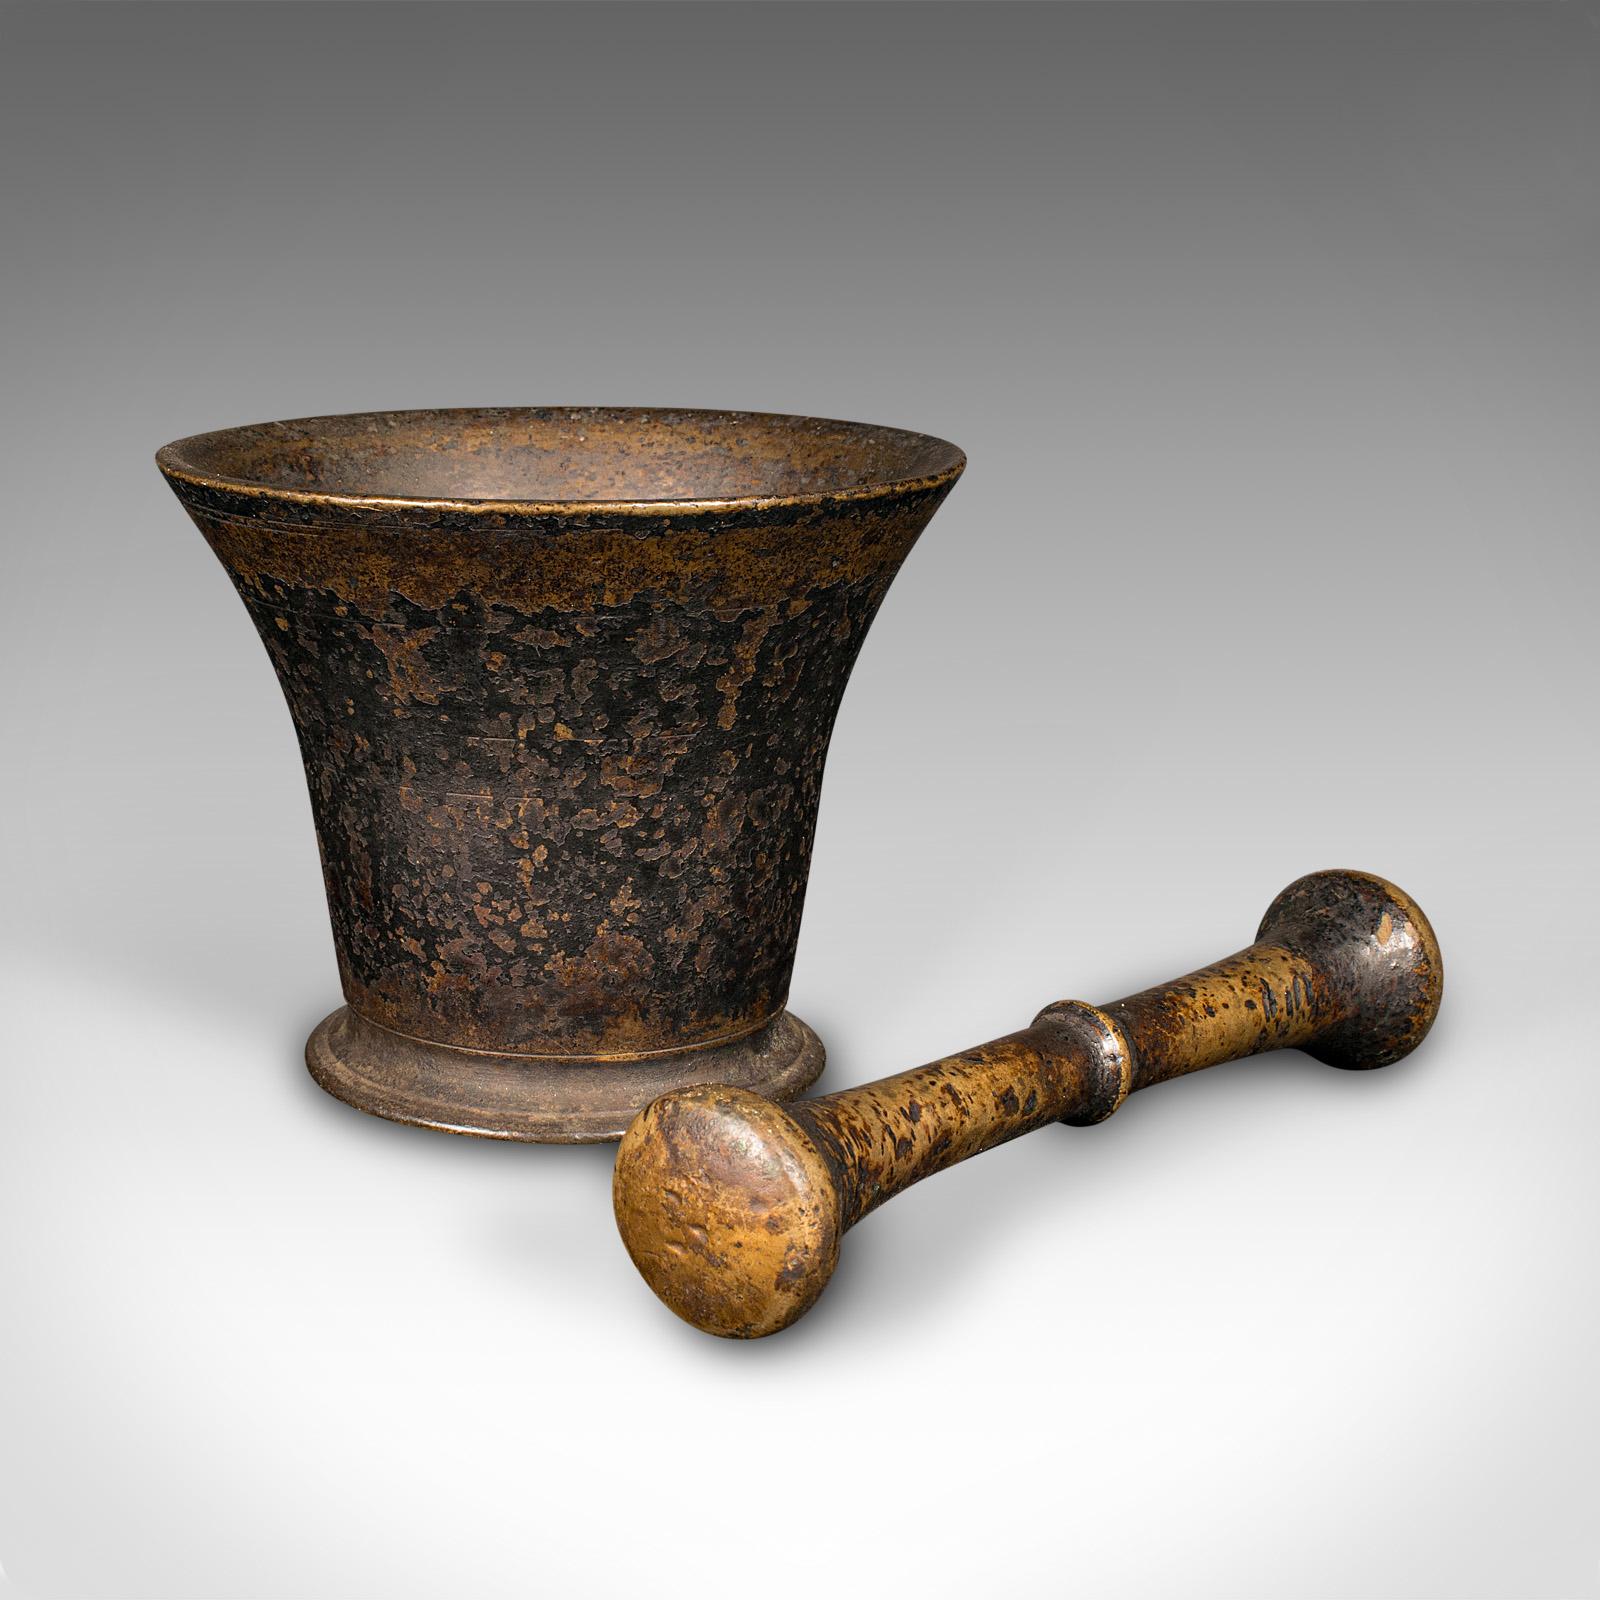 
This is an antique chemist's mortar & pestle. An English, weathered bronze apothecary aid, dating to the early Georgian period, circa 1720.

Superb, 300 year old example with appealing weathering
Displays a desirable, original antique